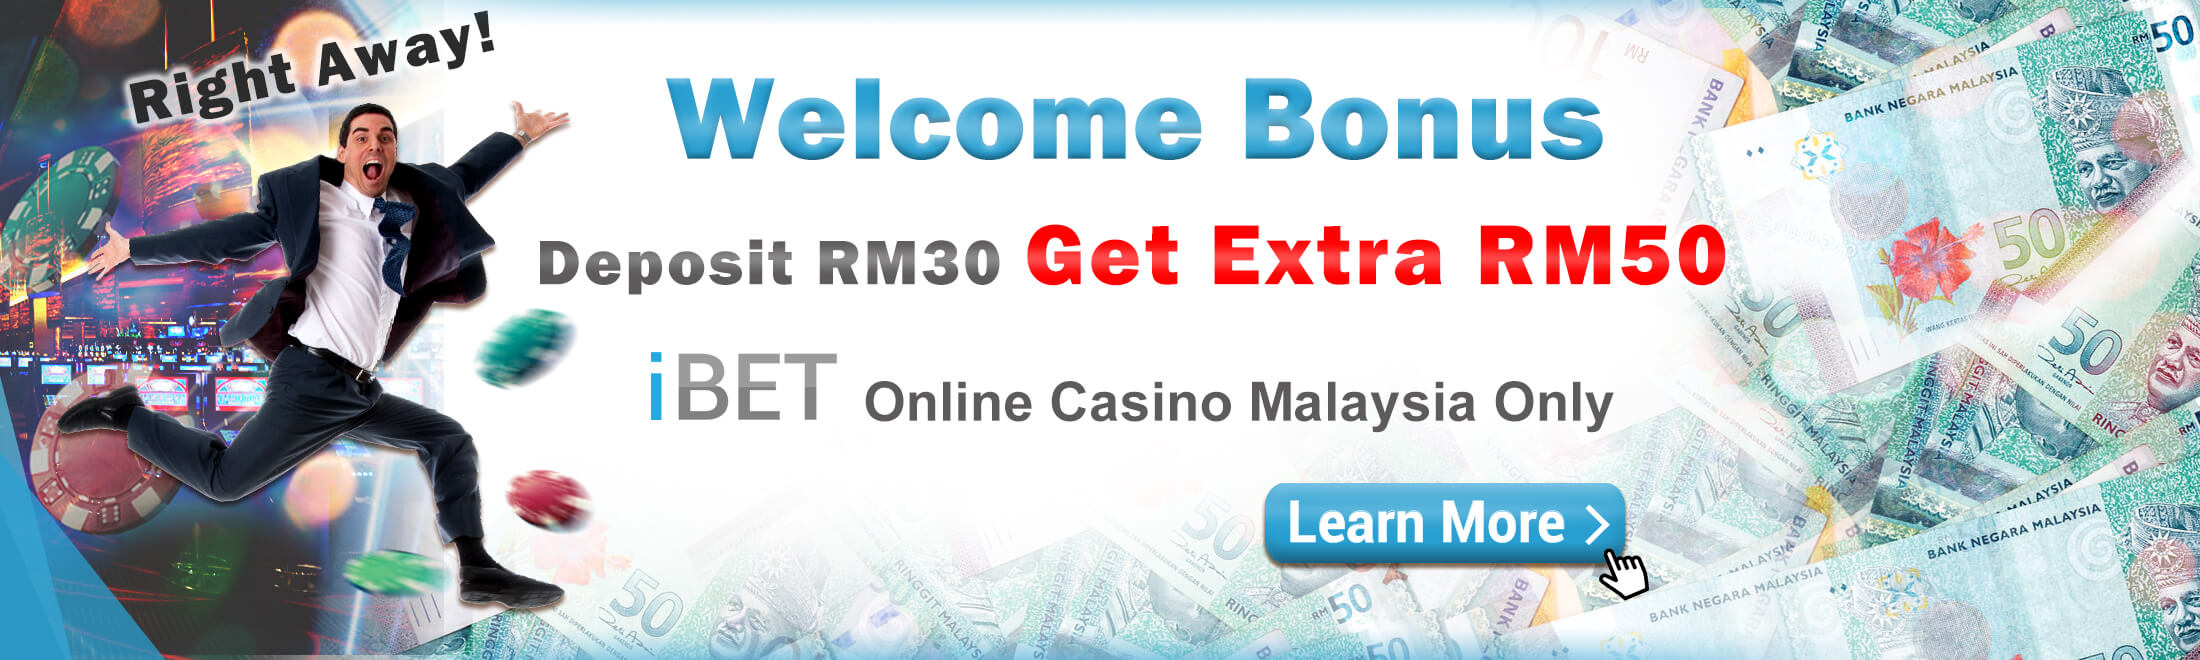 Free RM 50!!! iBET Online Casino Online 4D Malaysia Only